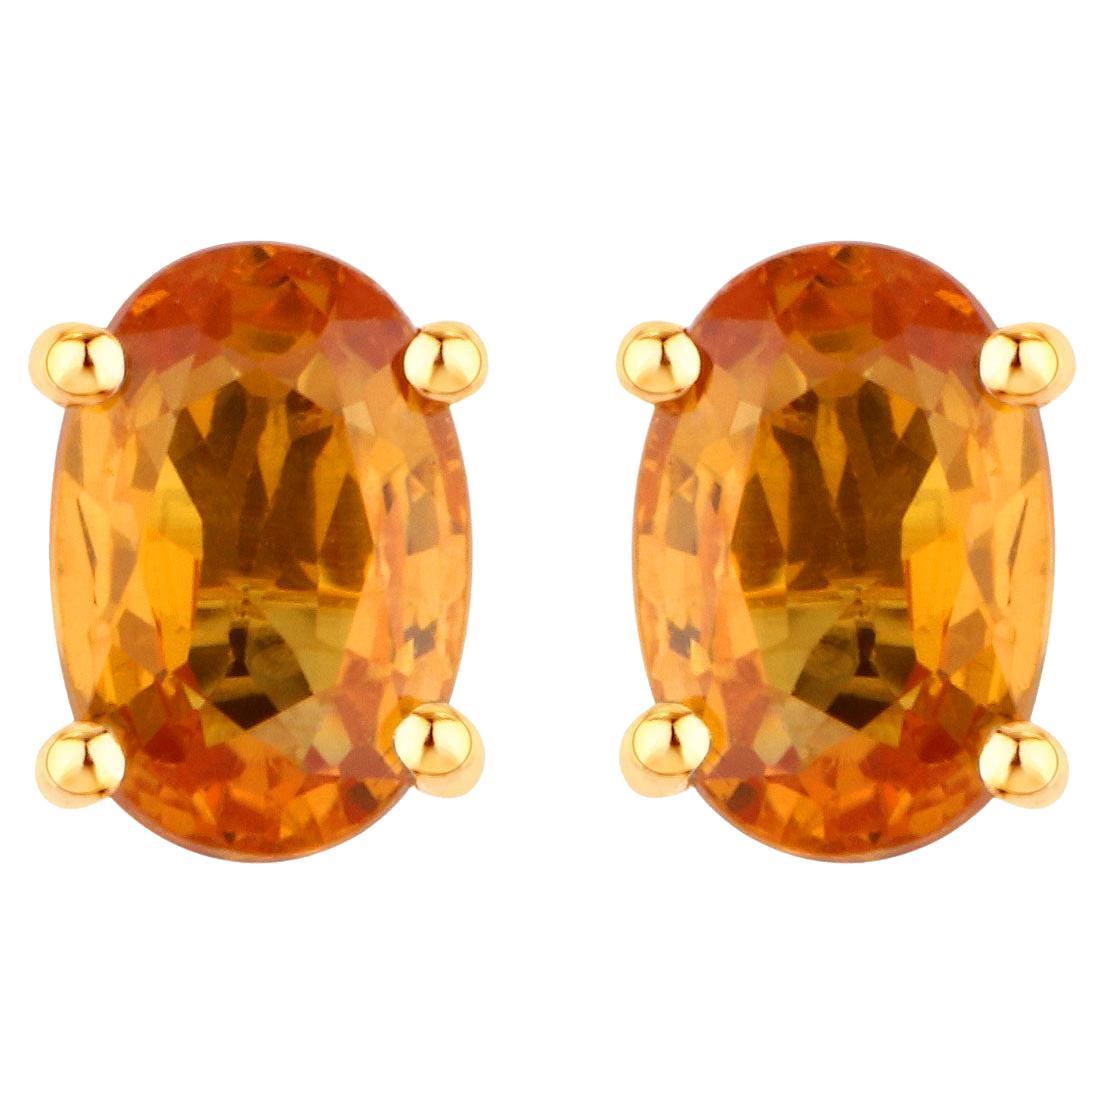 Orange Sapphires Stud Earrings 1.10 Carats Total 14K Yellow Gold For Sale